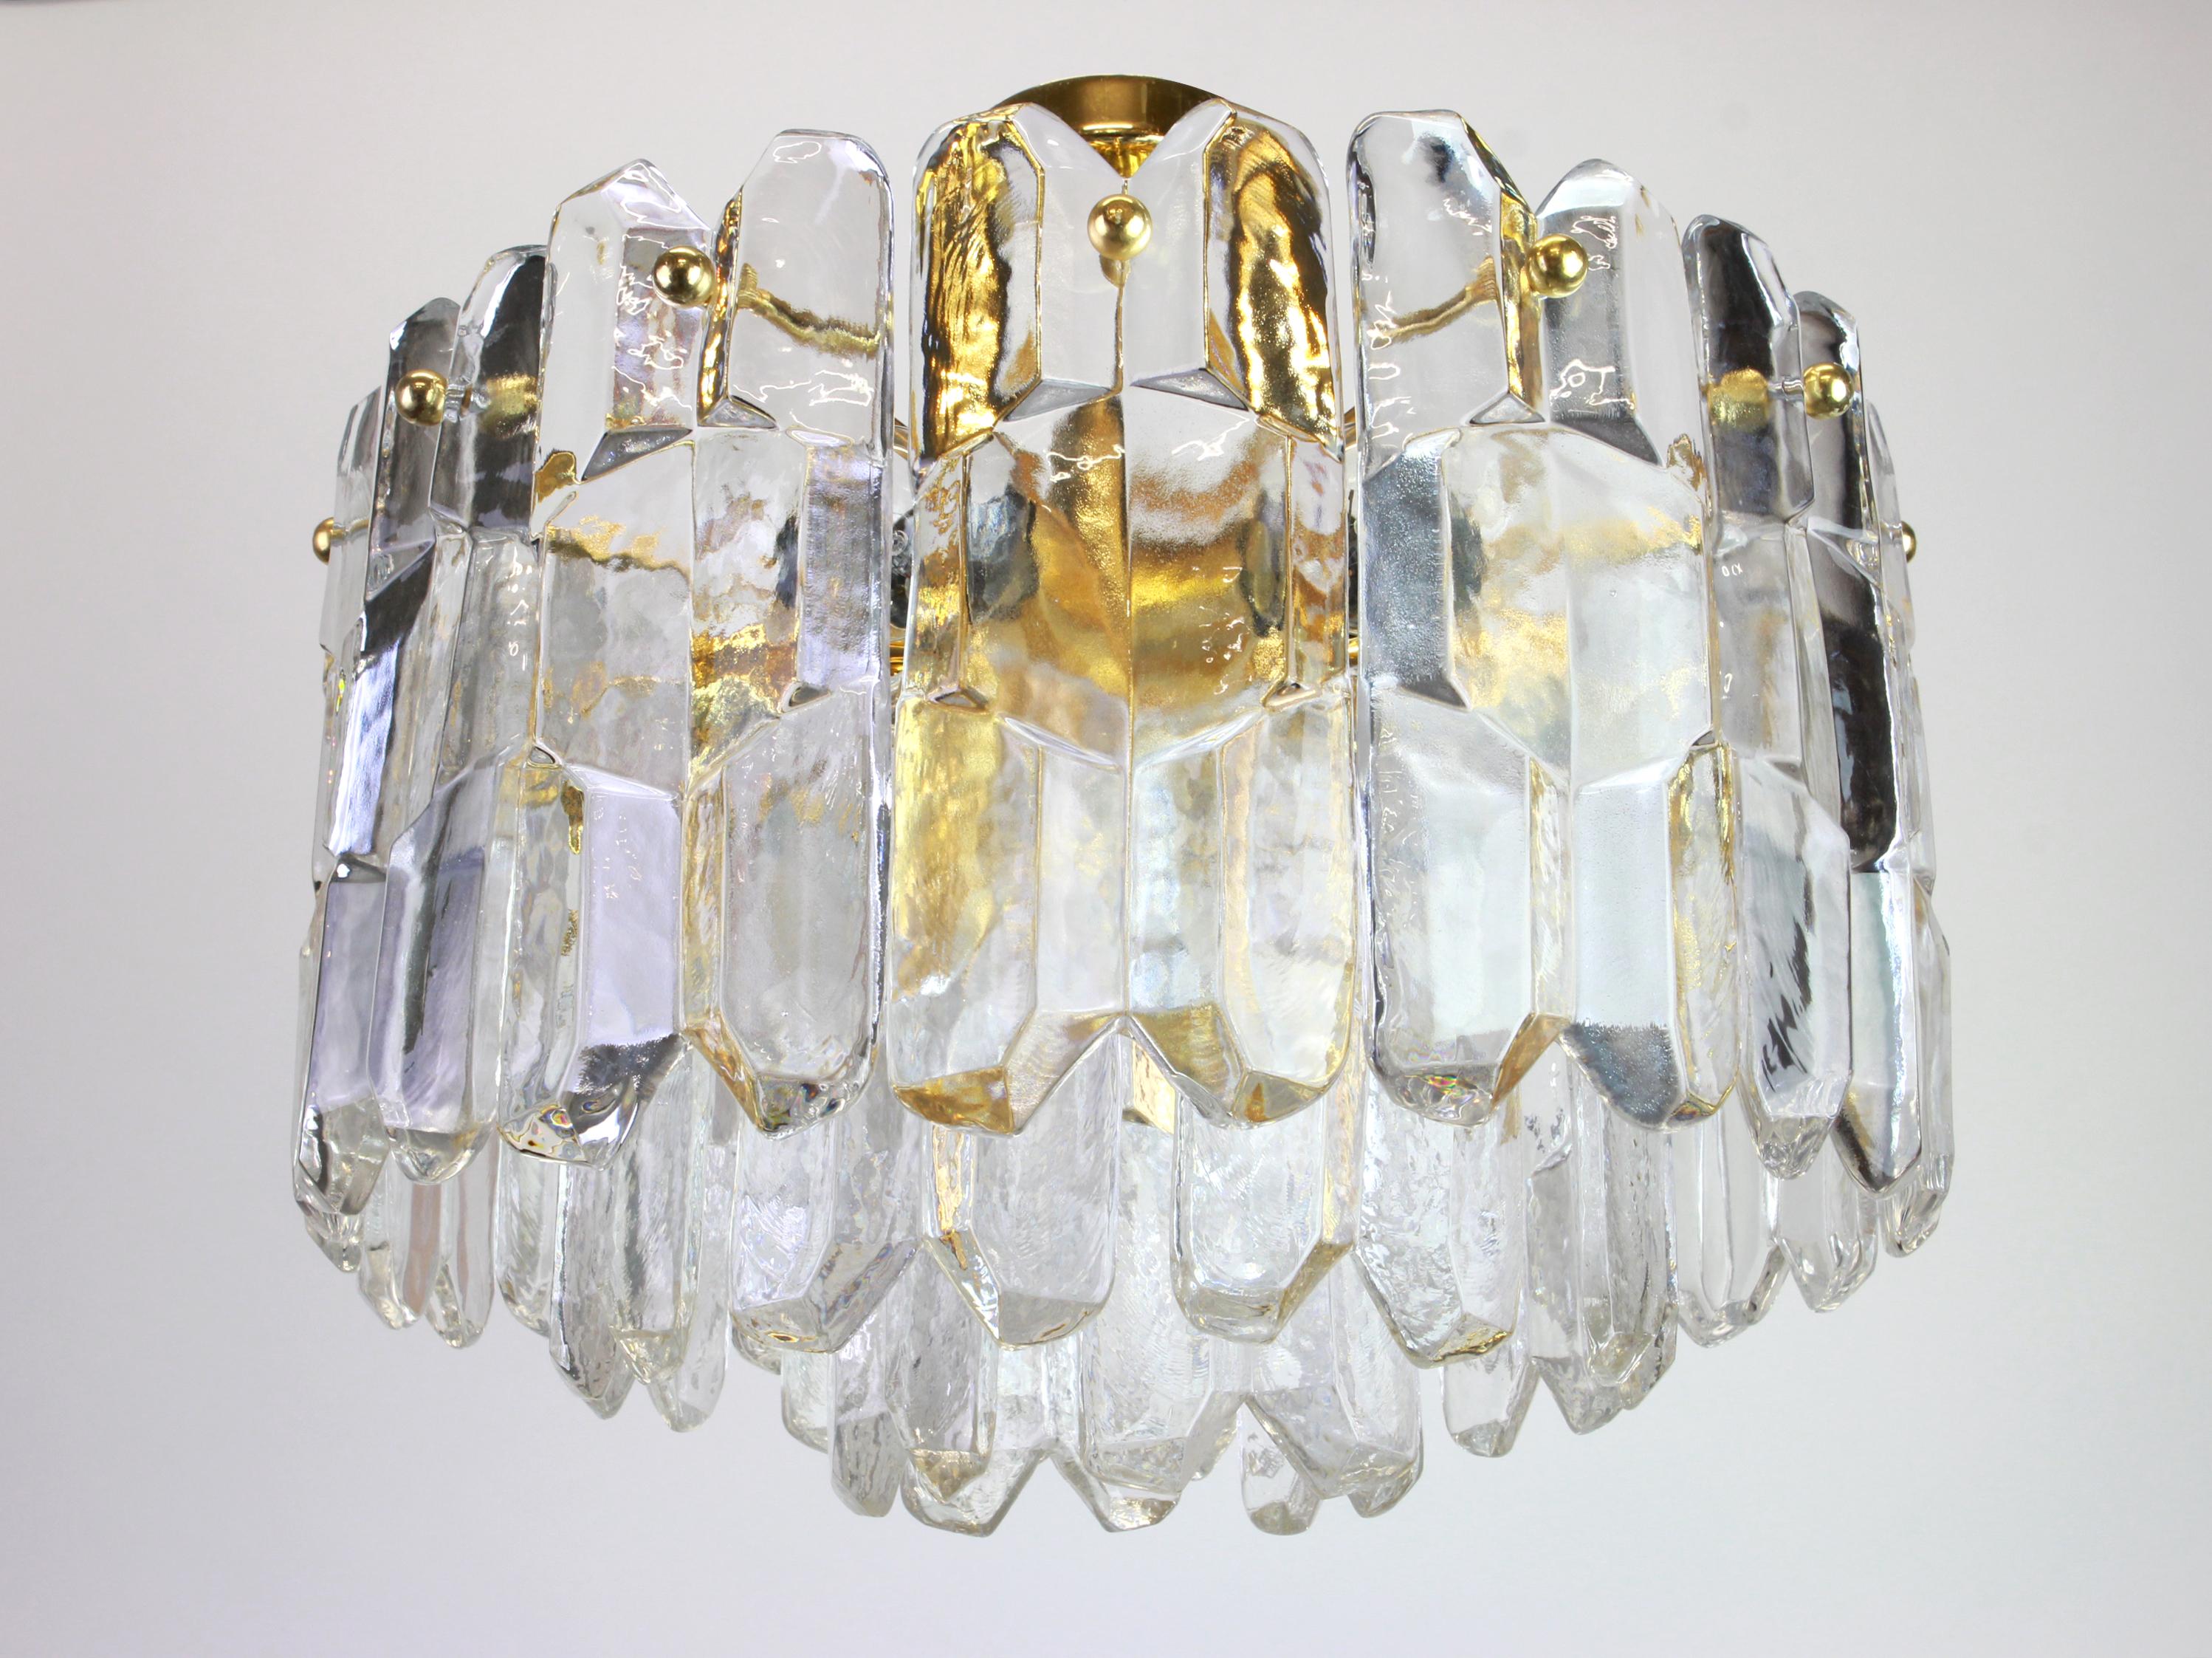 A wonderful gilt brass light fixture comprises crystal Murano glass pieces on a gilded brass frame. Its made by Kalmar (Serie: Palazzo), Austria, manufactured, circa 1970-1979.

It needs seven small bulbs and its compatible with the US / UK / ..